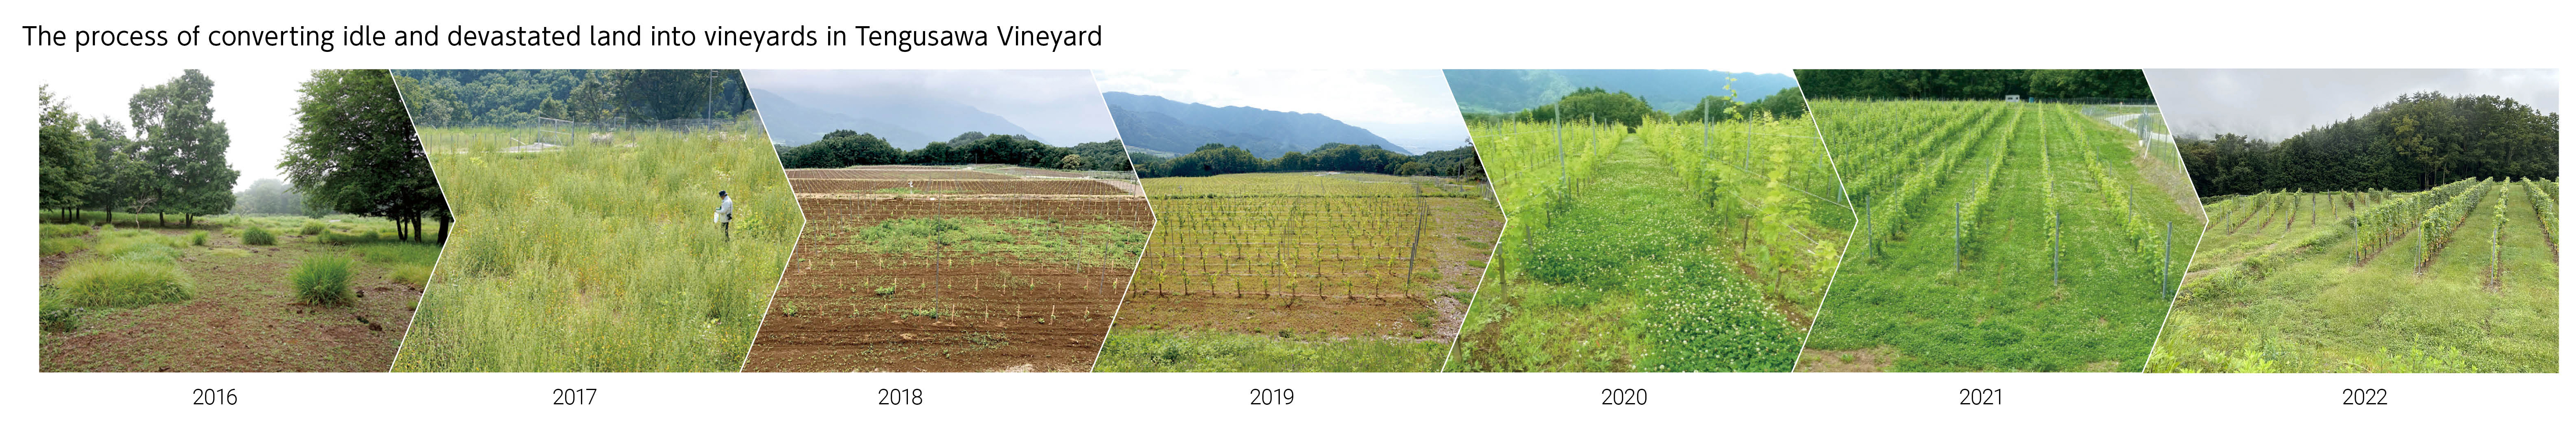 Image: The process of converting idle and devastated land into vineyards in Tengusawa Vineyard, 2016→2017→2018→2019→2020→2021